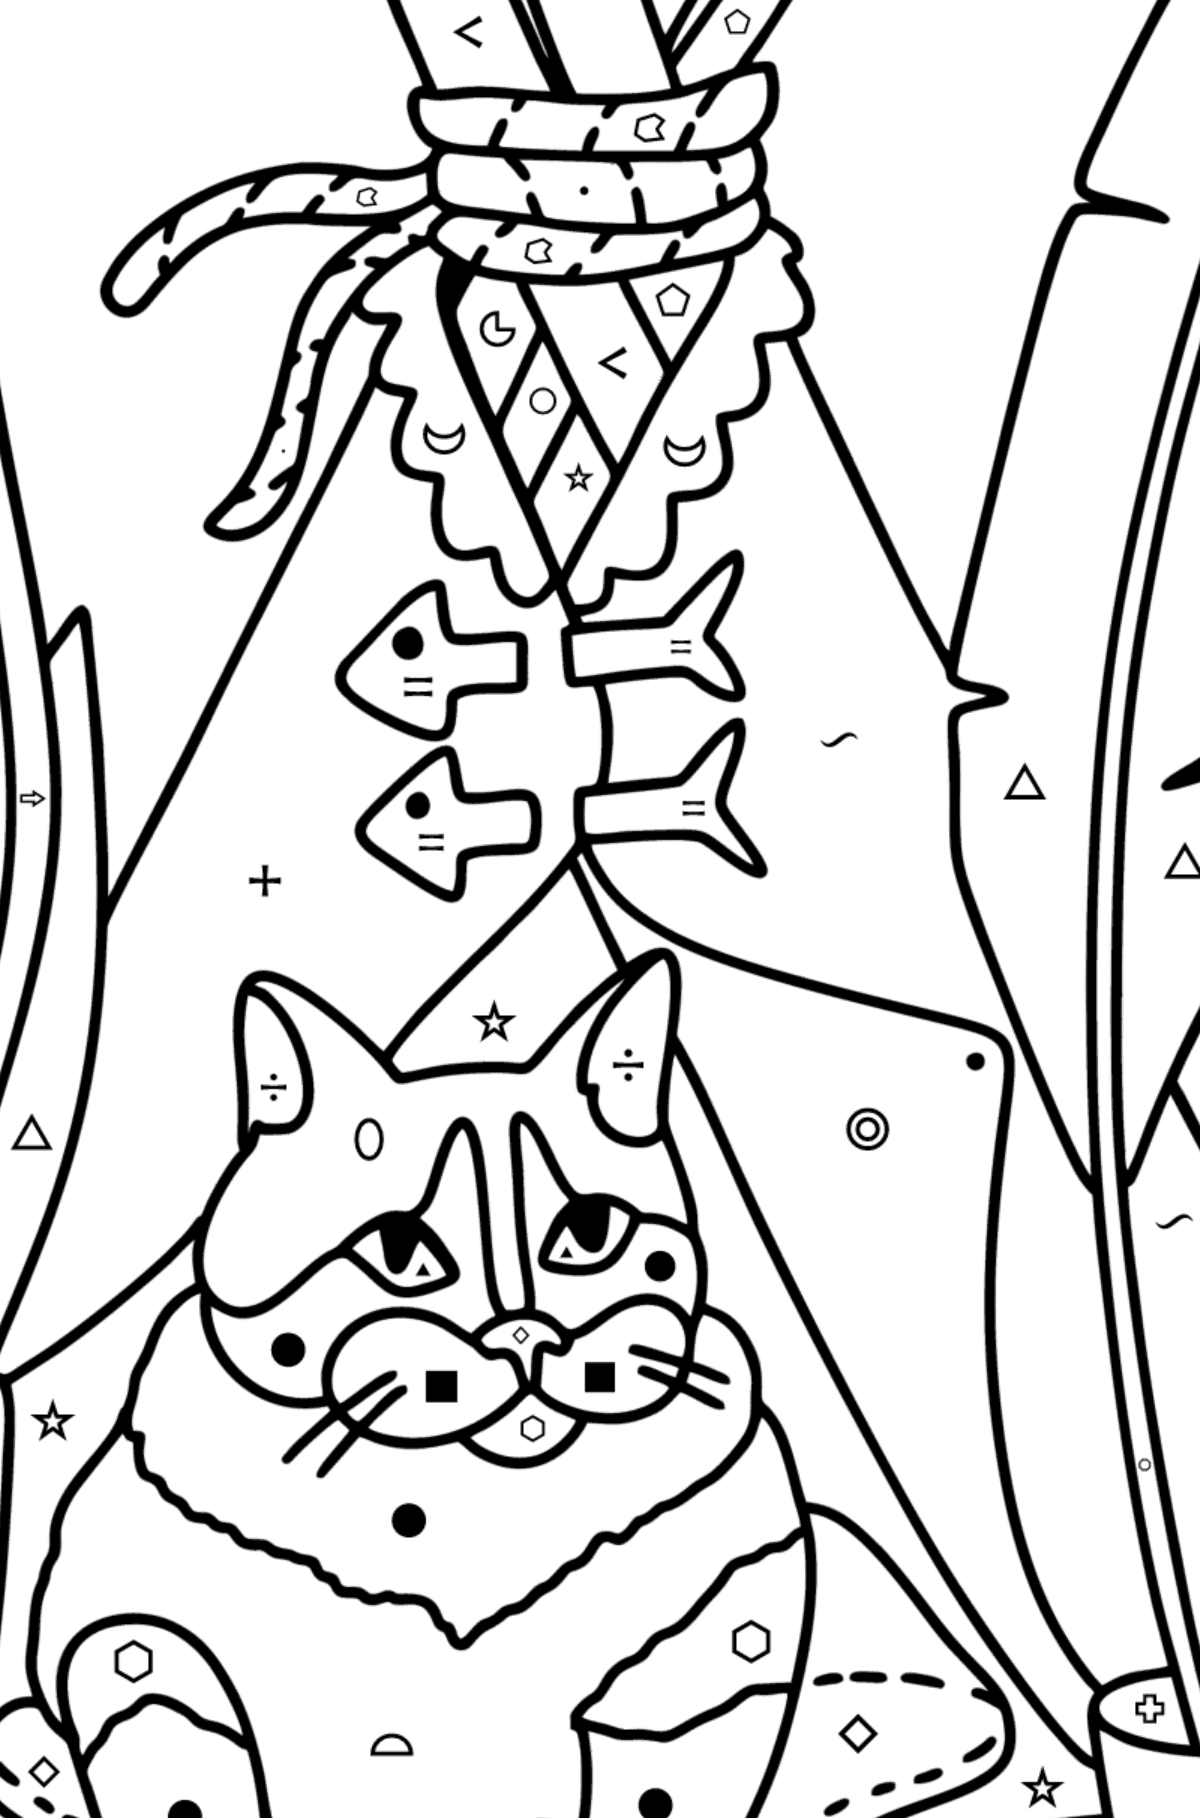 Cat House coloring page - Coloring by Symbols and Geometric Shapes for Kids